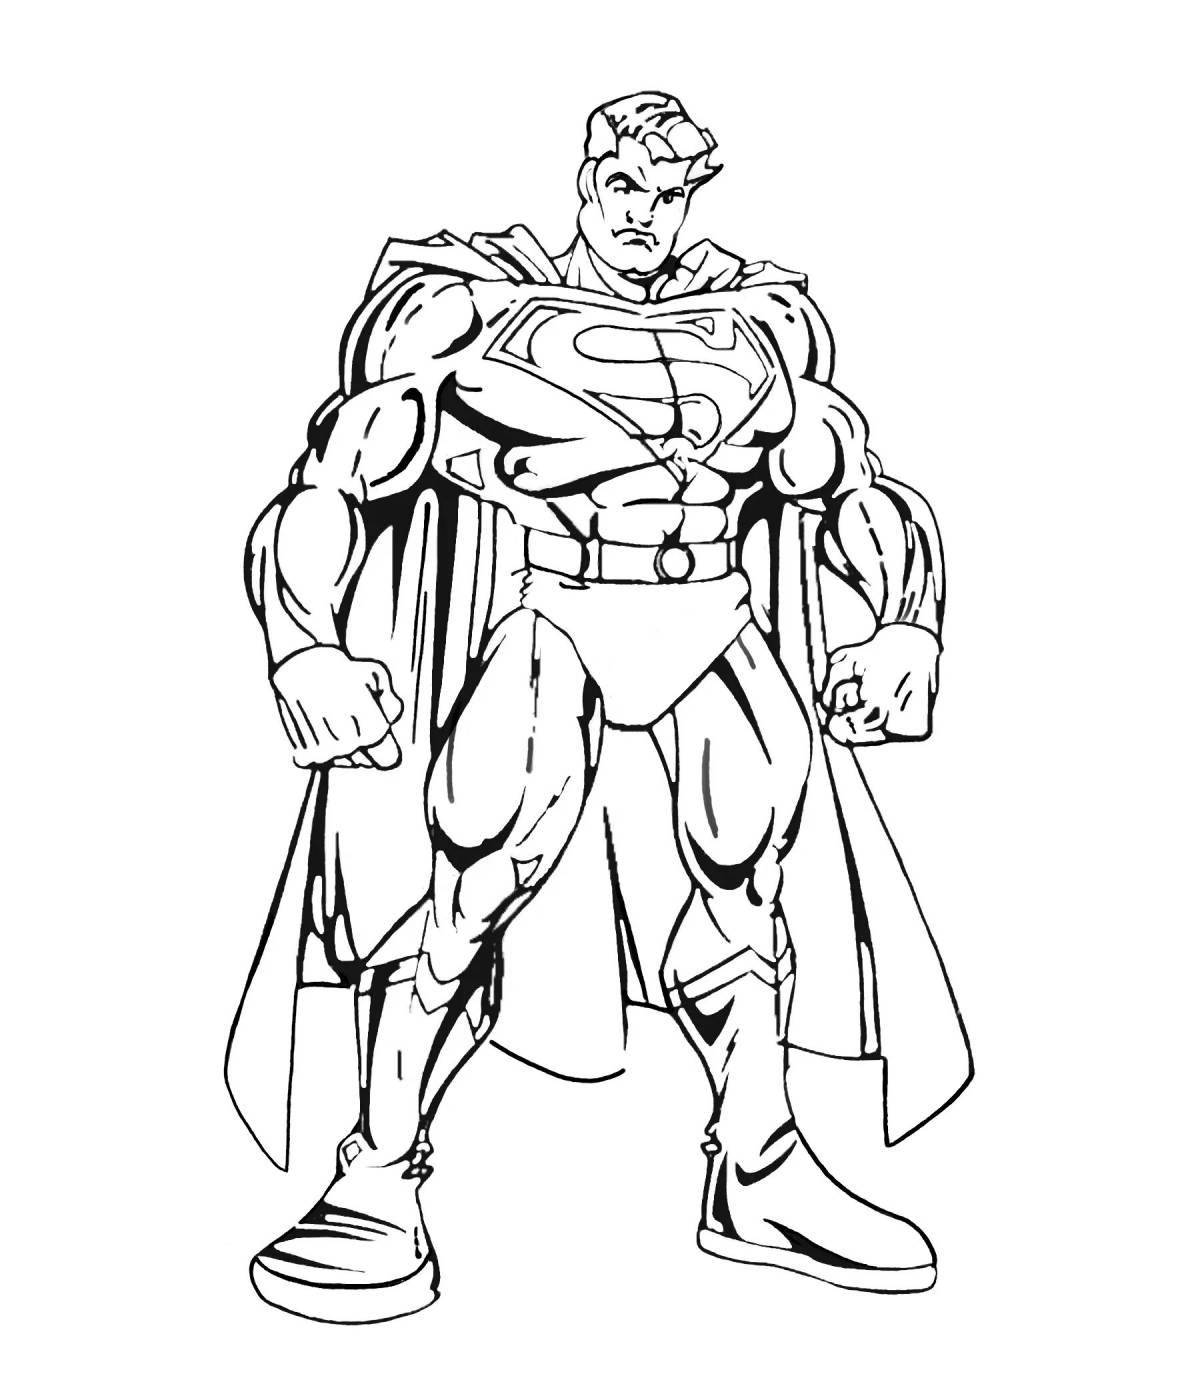 Superman playful coloring book for 3-4 year olds